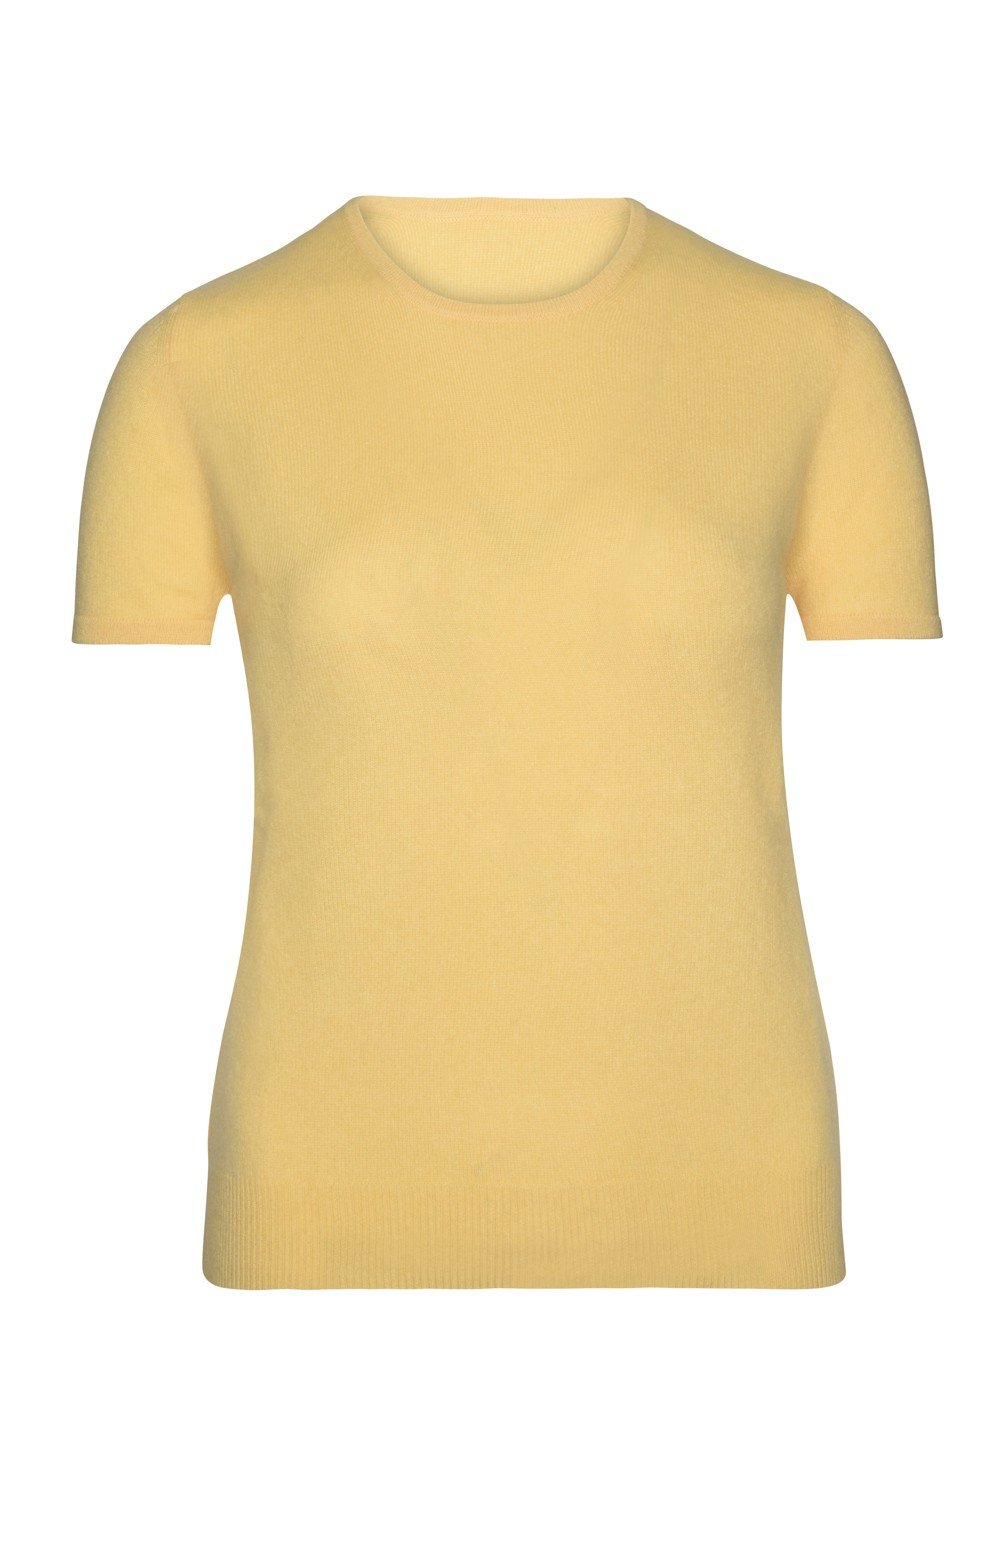 Cashmere Luxury Tee - more colors available